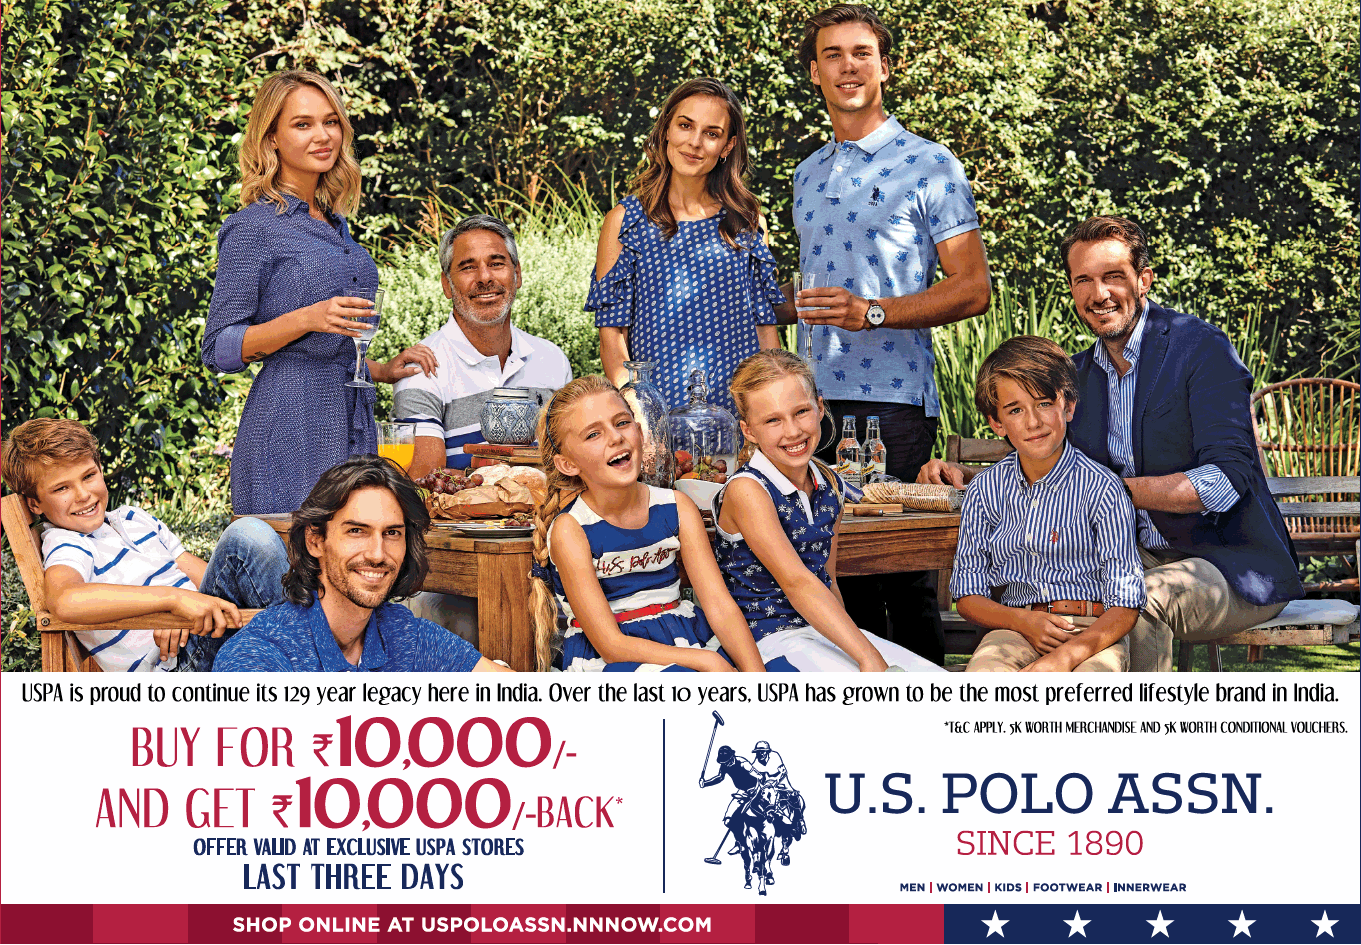 u-s-polo-assn-clothing-buy-for-rs-10000-and-get-rs-10000-back-ad-delhi-times-17-05-2019.png